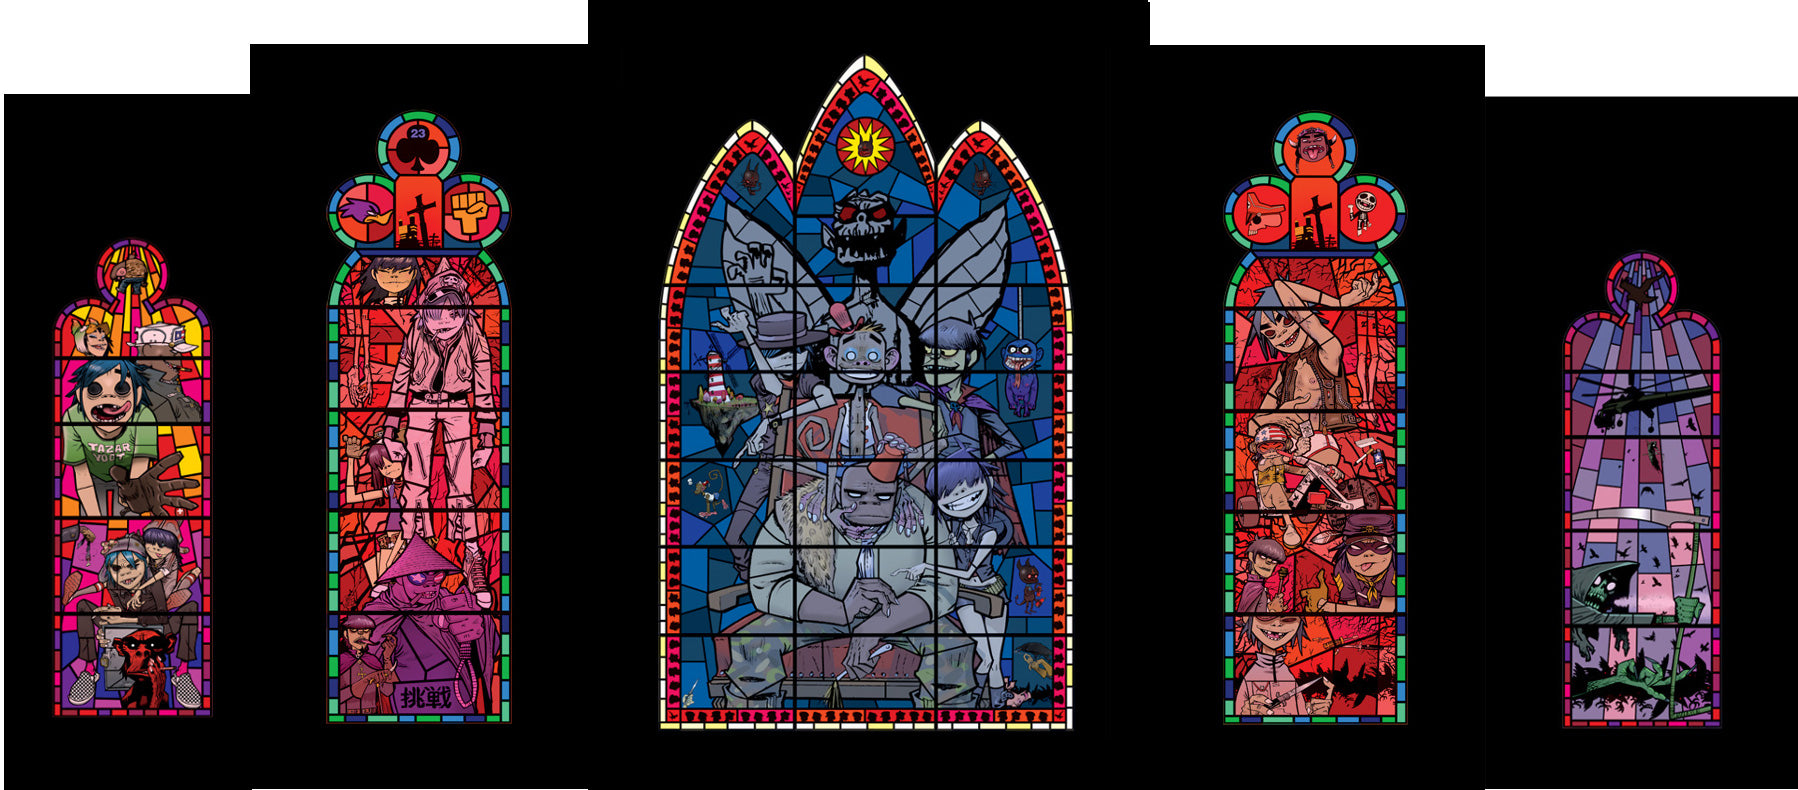 Jamie Hewlett - Stained Glass Window Set Of 5 Prints (Unsigned)